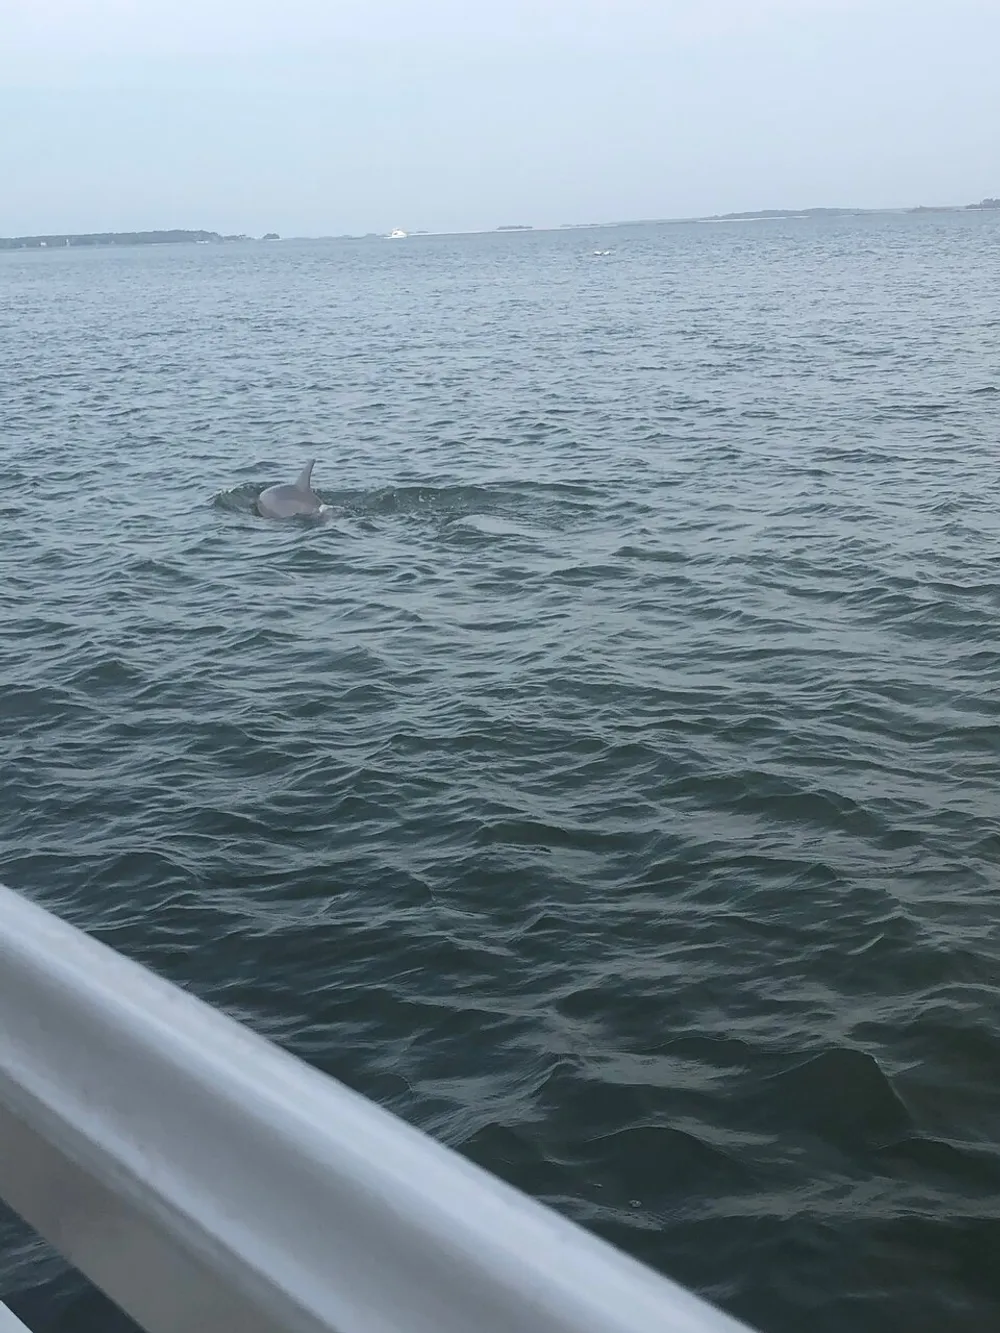 A dolphin is visible above the waters surface near a boat with a calm sea and a distant shoreline in the background